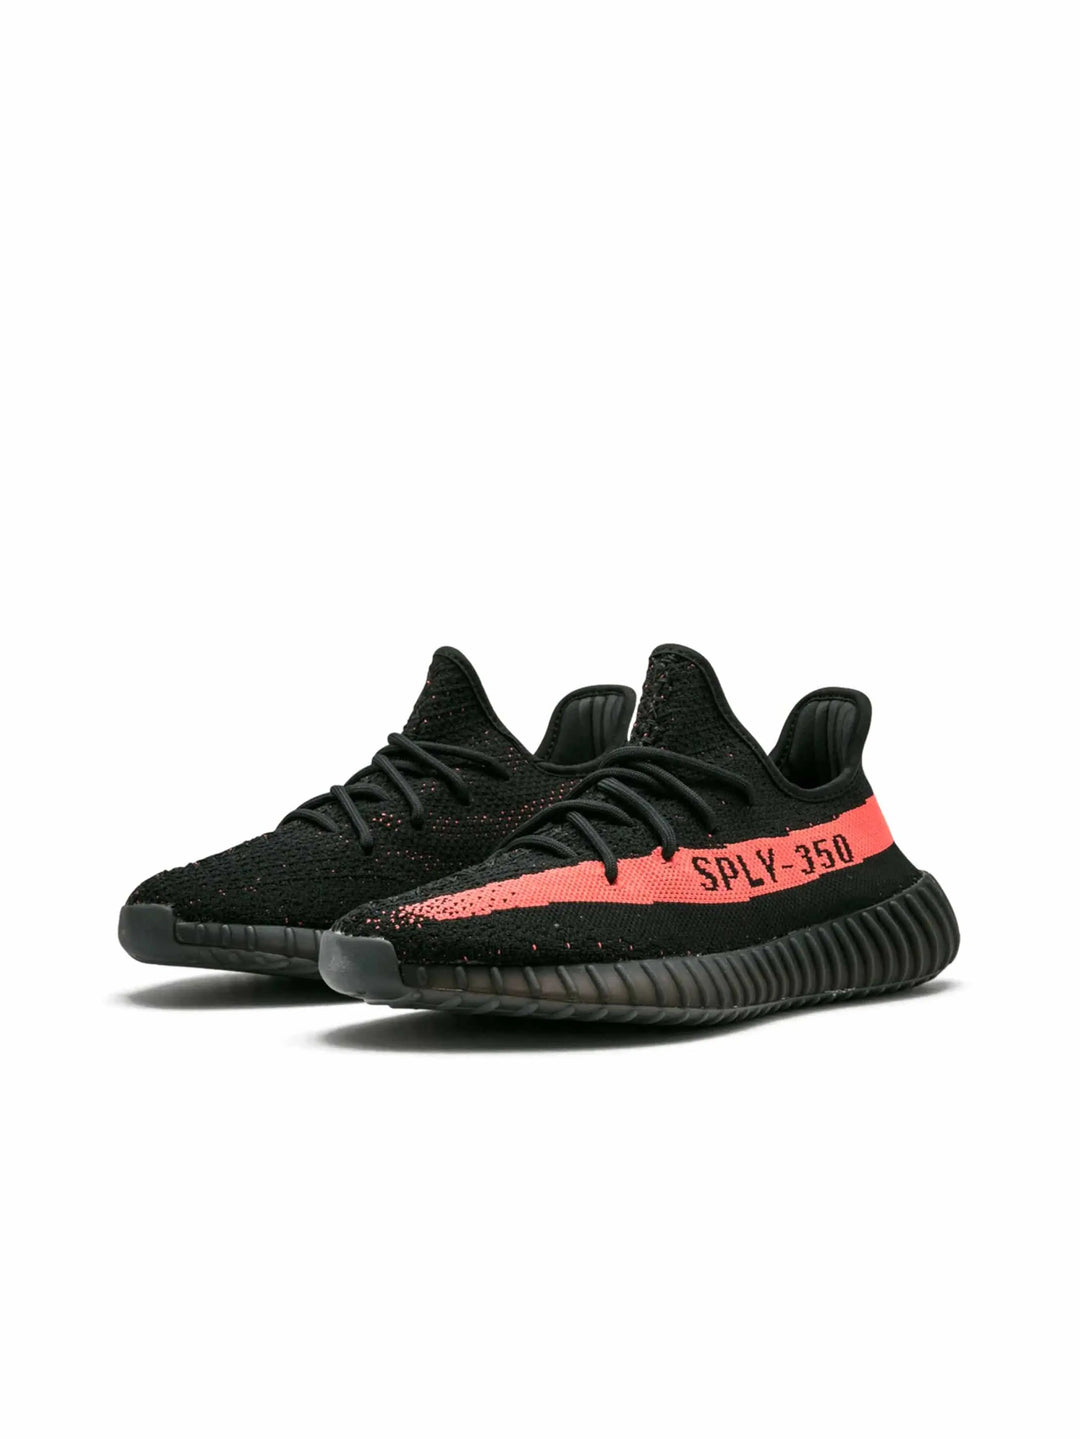 adidas Yeezy Boost 350 V2 Core Black Red (2016/2022/2023) - Prior